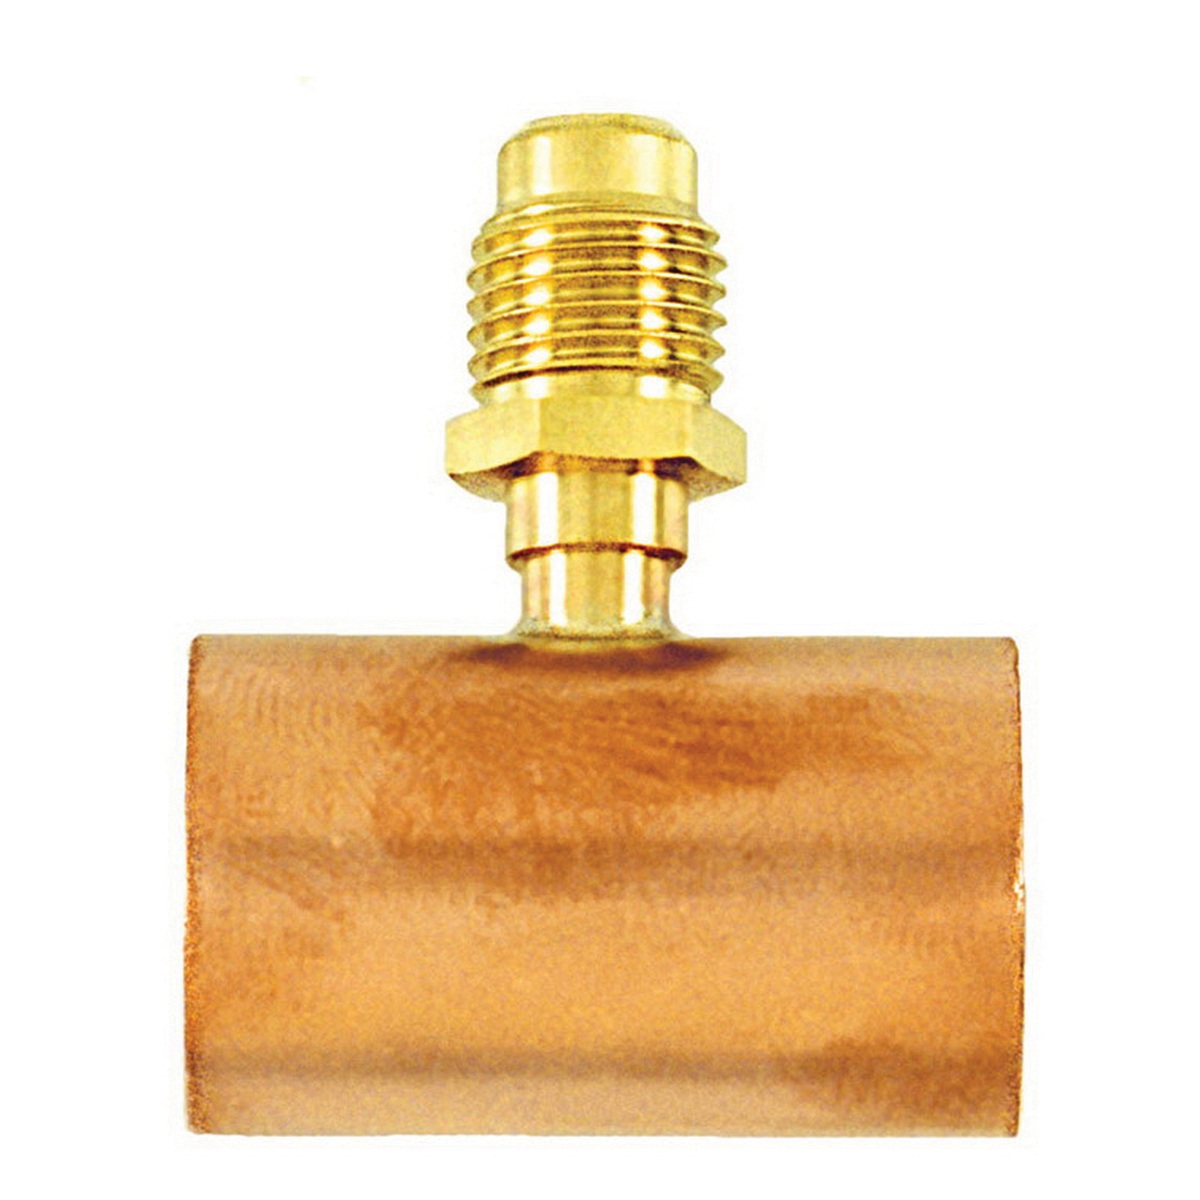 C&D Valve 84TS CD8434 Access Tee Valve, 1/4 x 3/4 in Nominal, Male Flared x OD Tube Connection, Brass and Copper Body